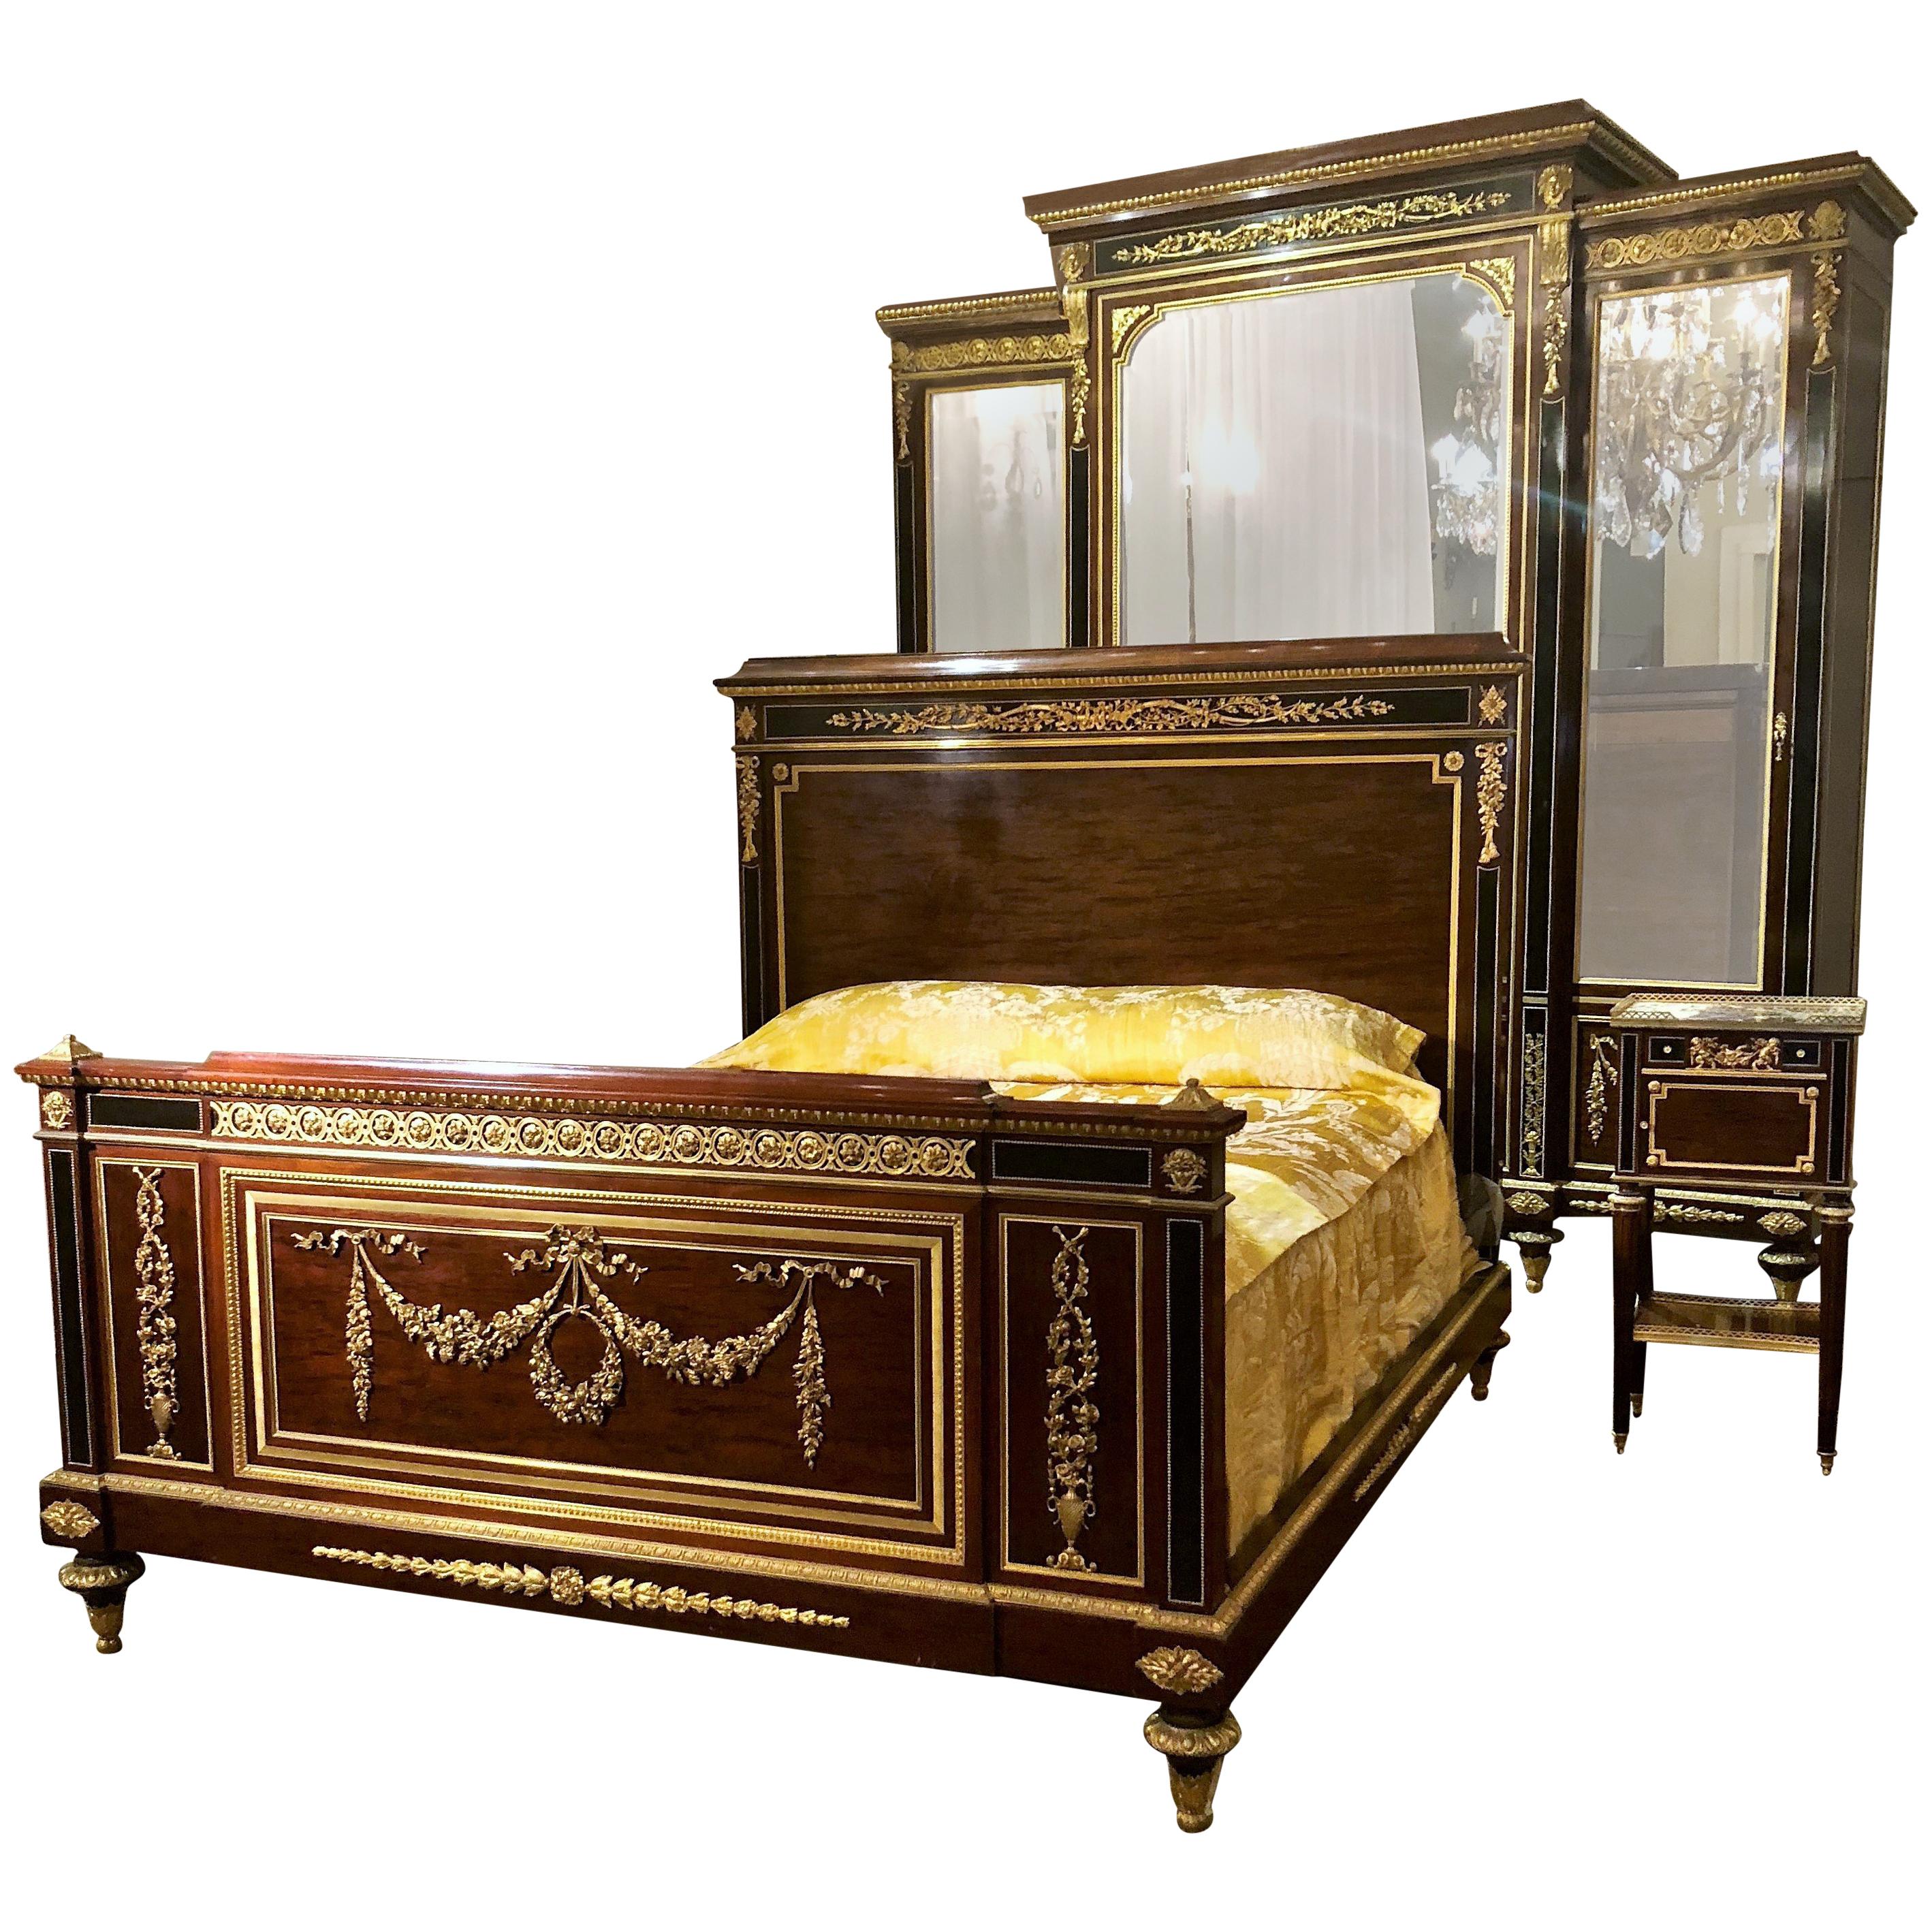 Antique French Louis XVI Style Bedroom Suite by Master Ebeniste Francois Linke